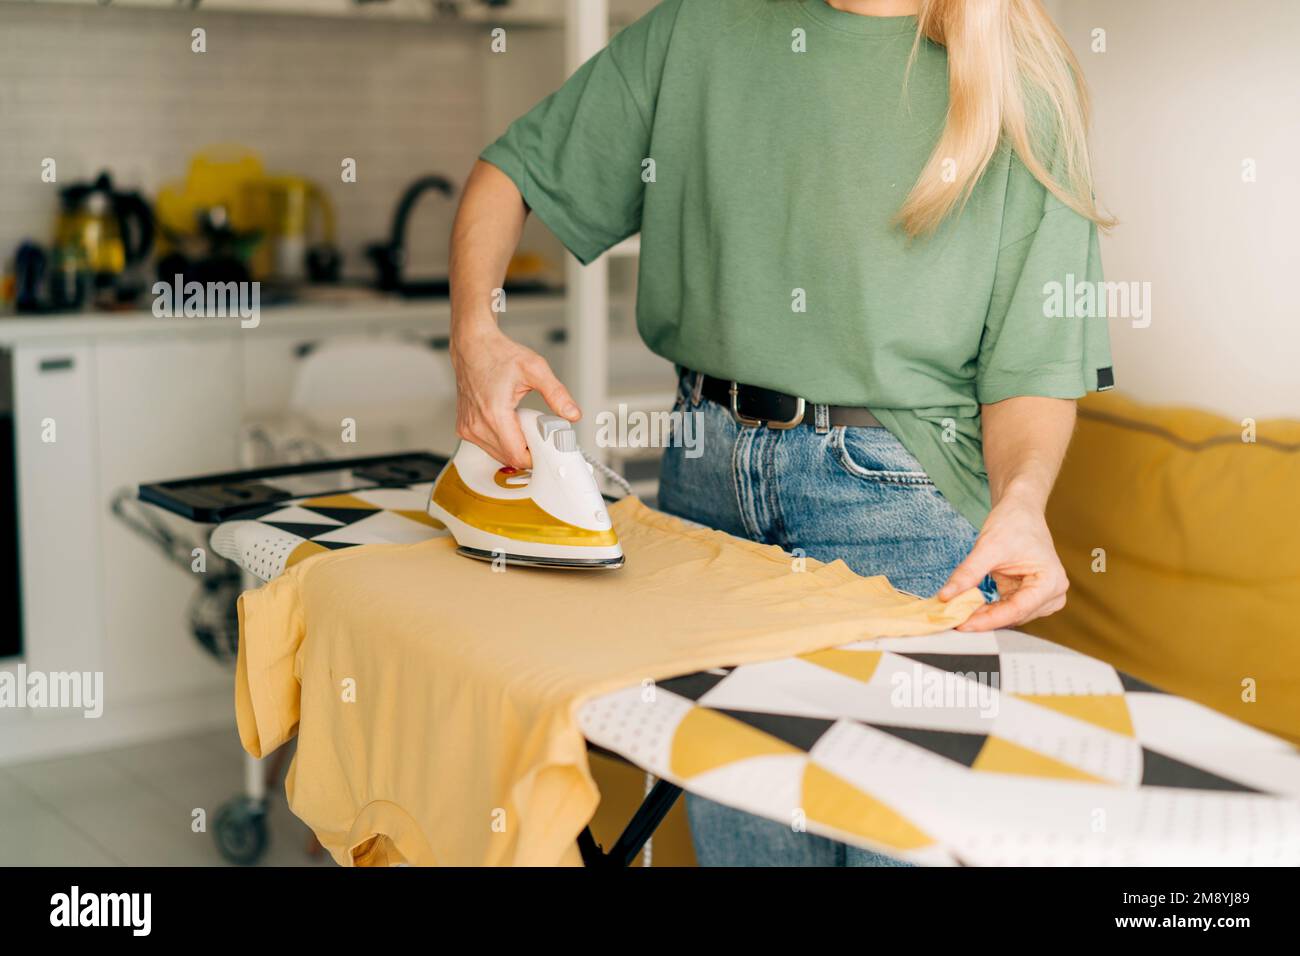 Woman housewife does housework and irons clothes at home. Stock Photo